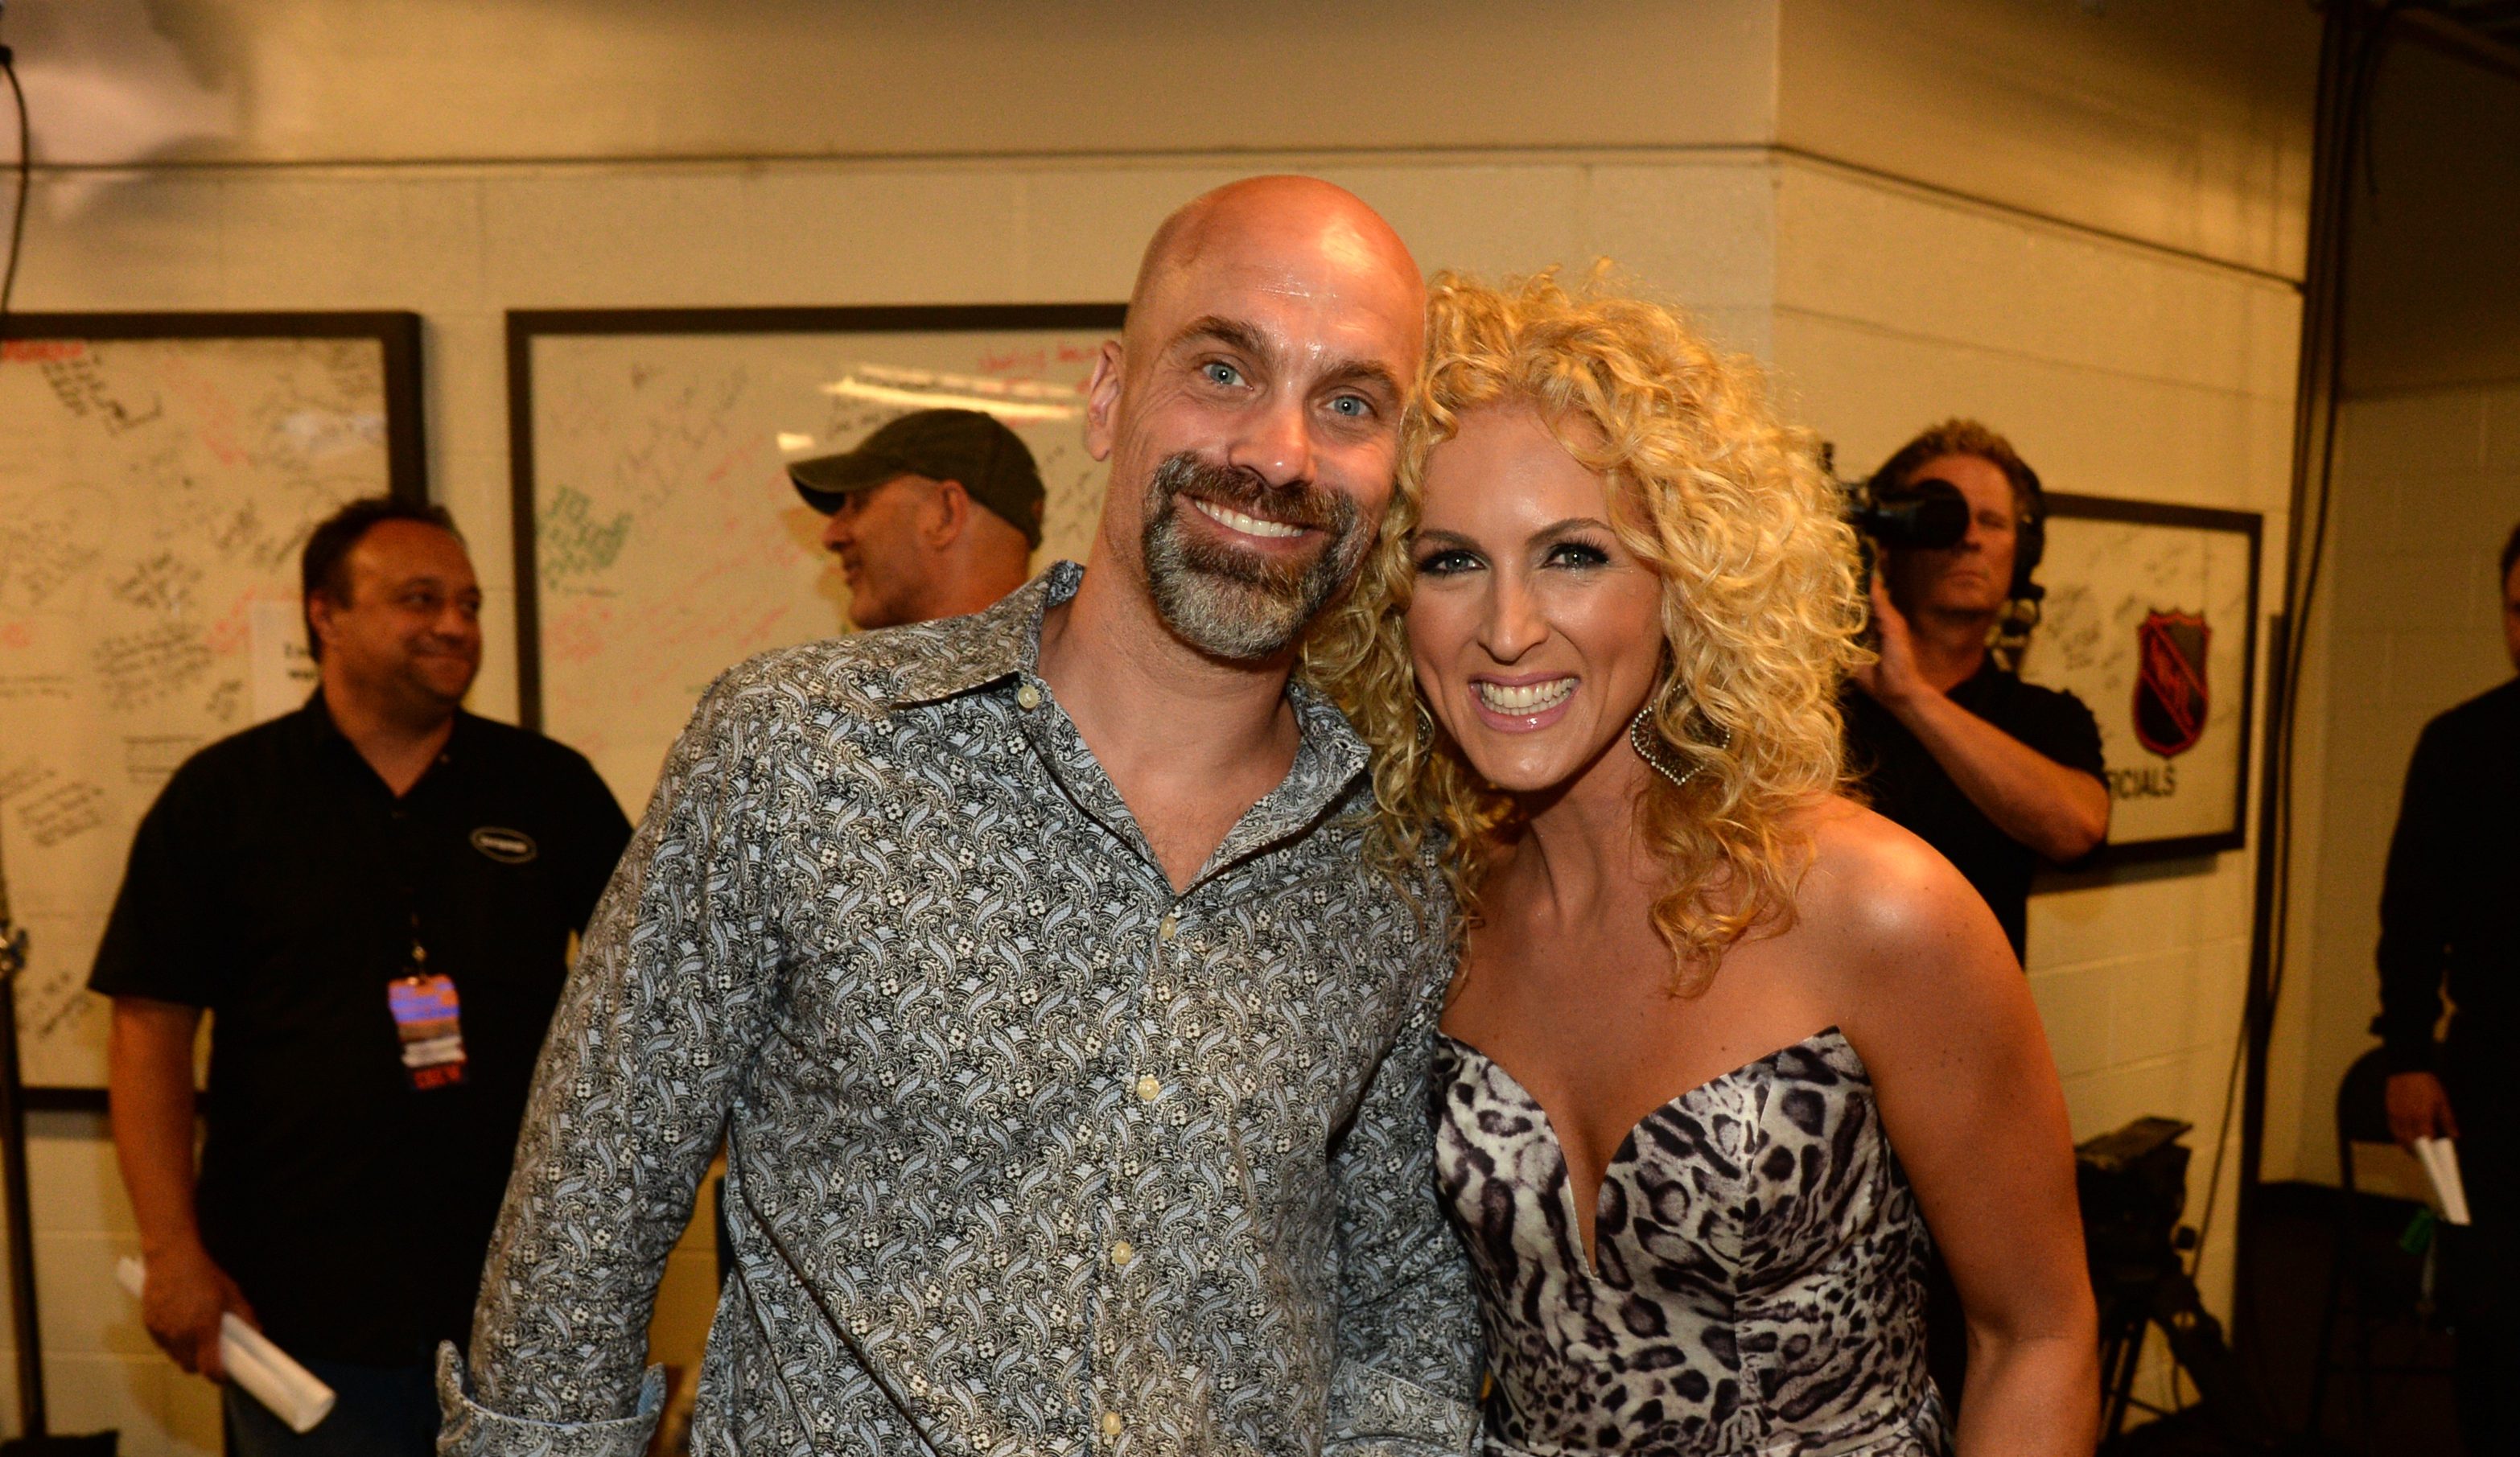 NASHVILLE, TN - JUNE 04: Kimberly Schlapman (R) of Little Big Town and her husband Stephen Scaplapman attend the 2014 CMT Music Awards at Bridgestone Arena on June 4, 2014 in Nashville, Tennessee.